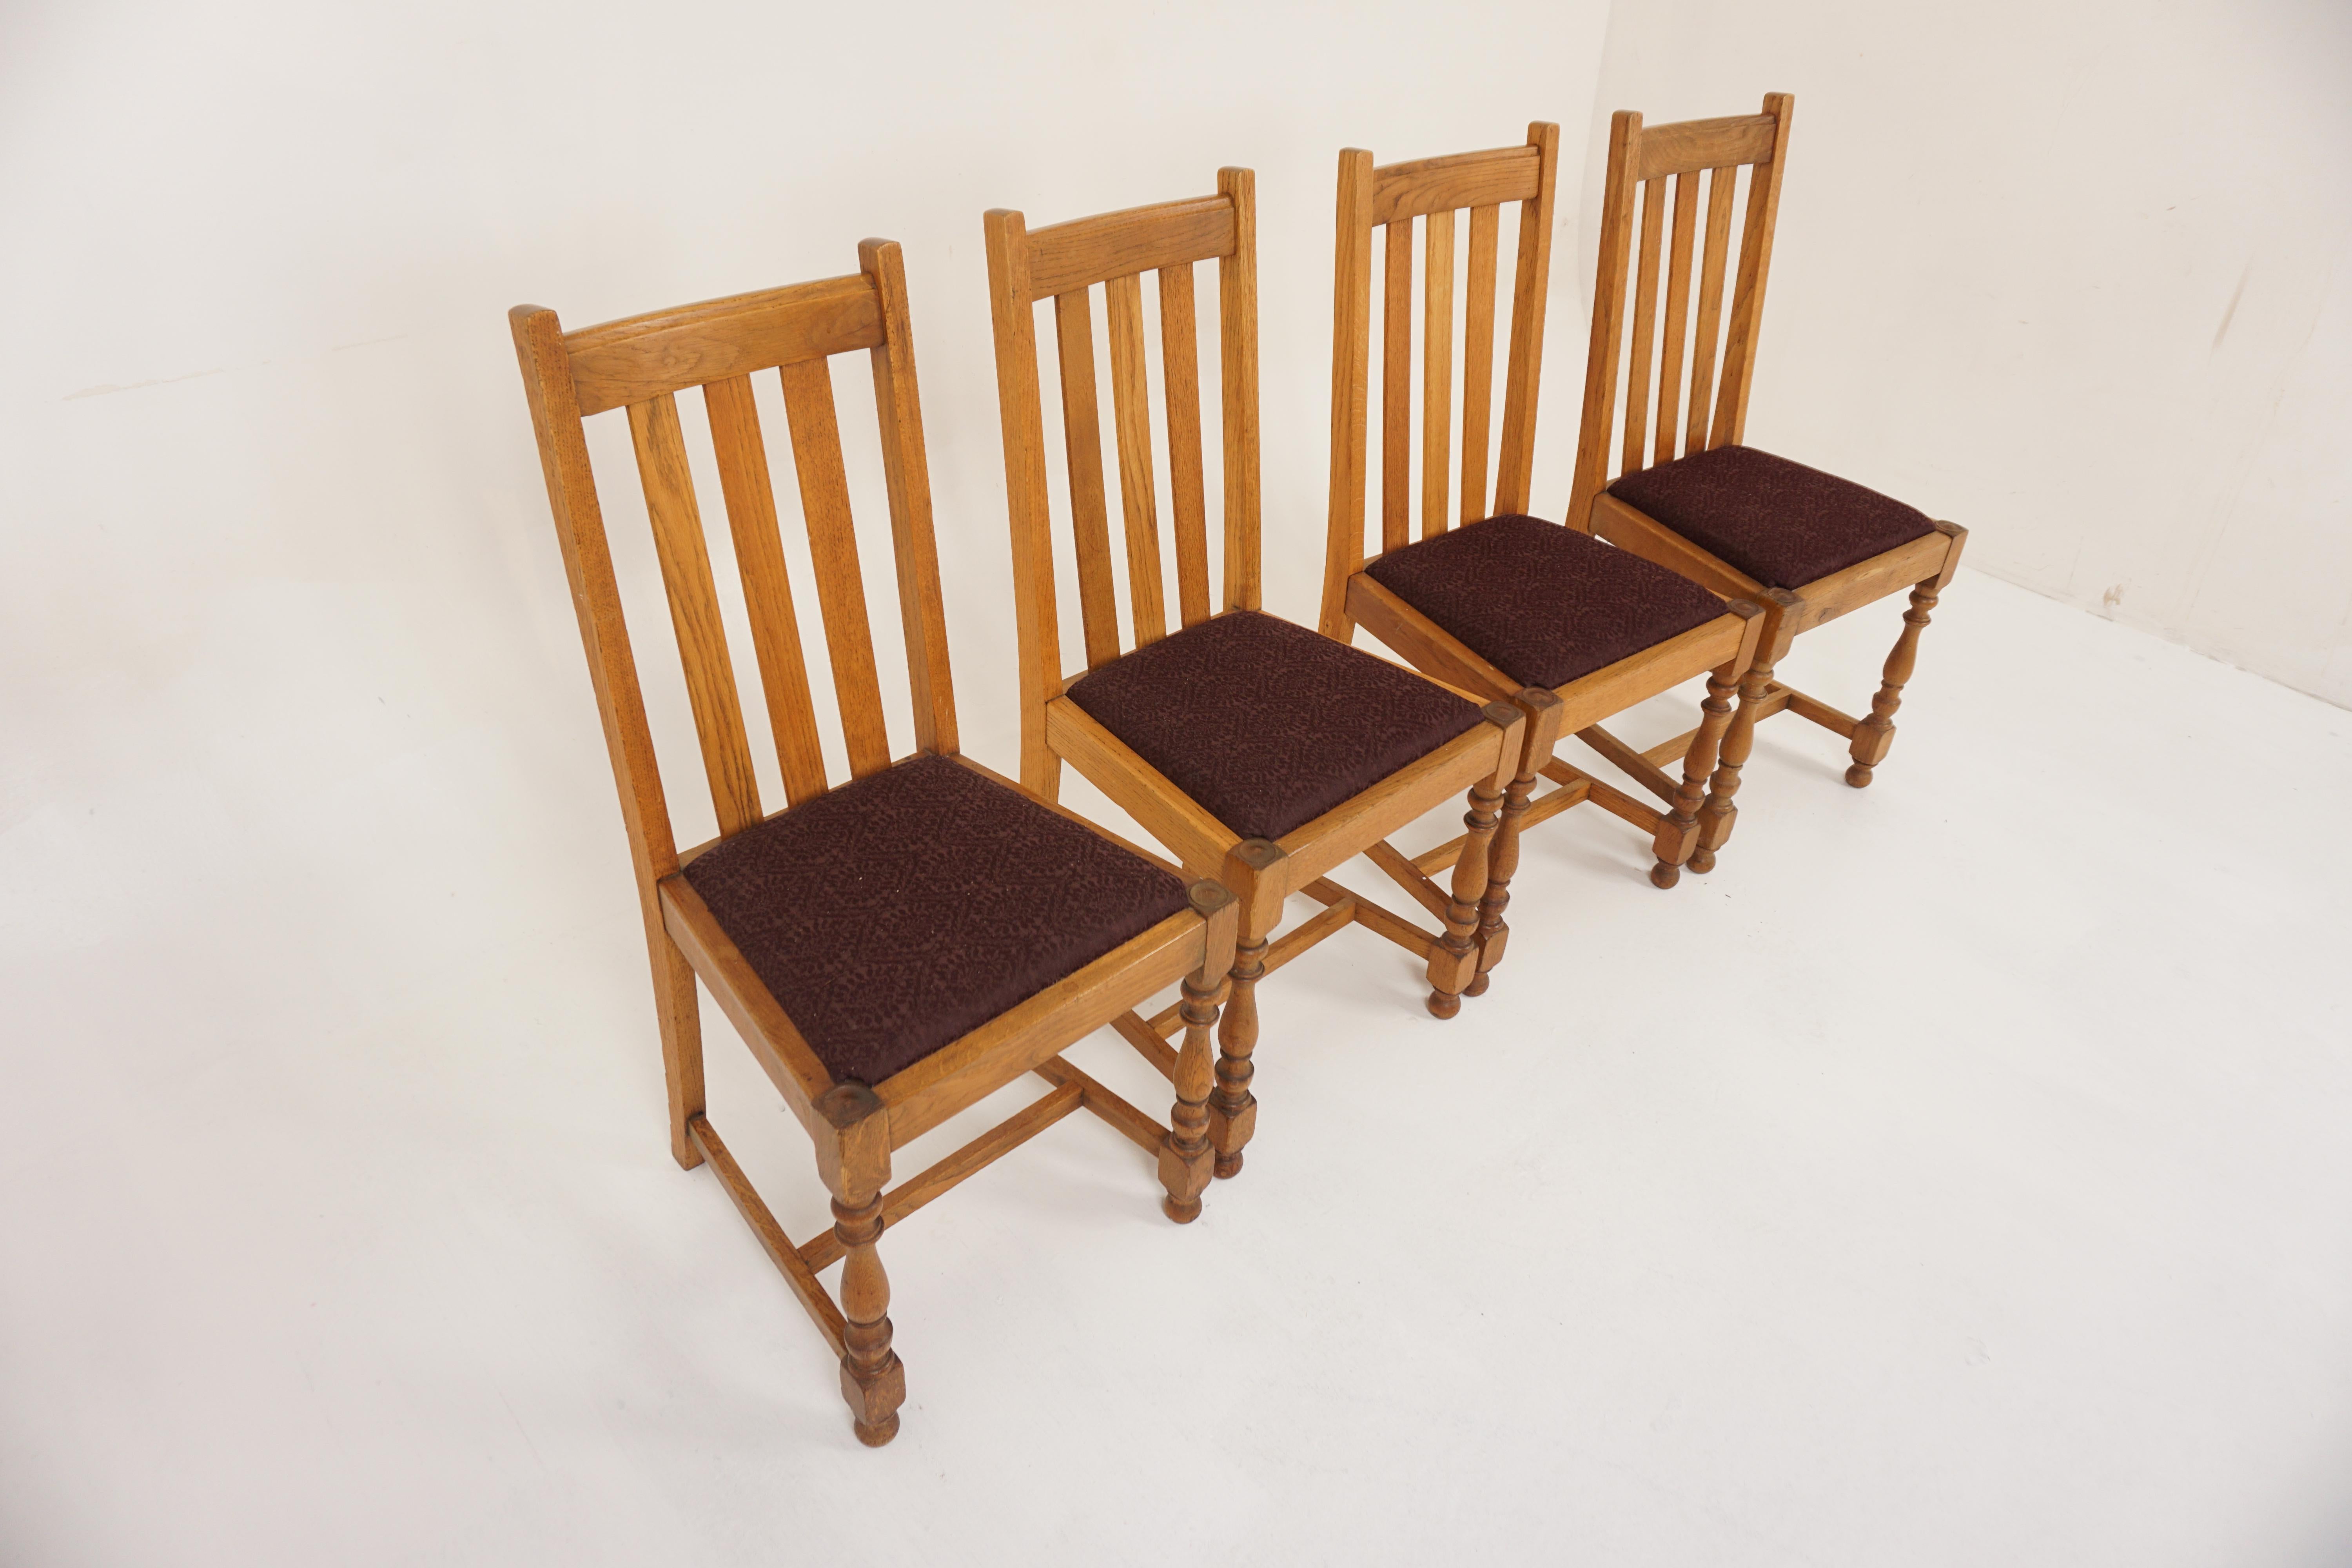 4 Vintage Solid Oak High Back Chairs, Lift Out Seats, Scotland 1920, H1201 

Scotland 1920
Solid Oak
Original Finish
Top rail with three vertical slats
Upholstered seat lifts out making it easy to recover
All standing on turned legs to the front